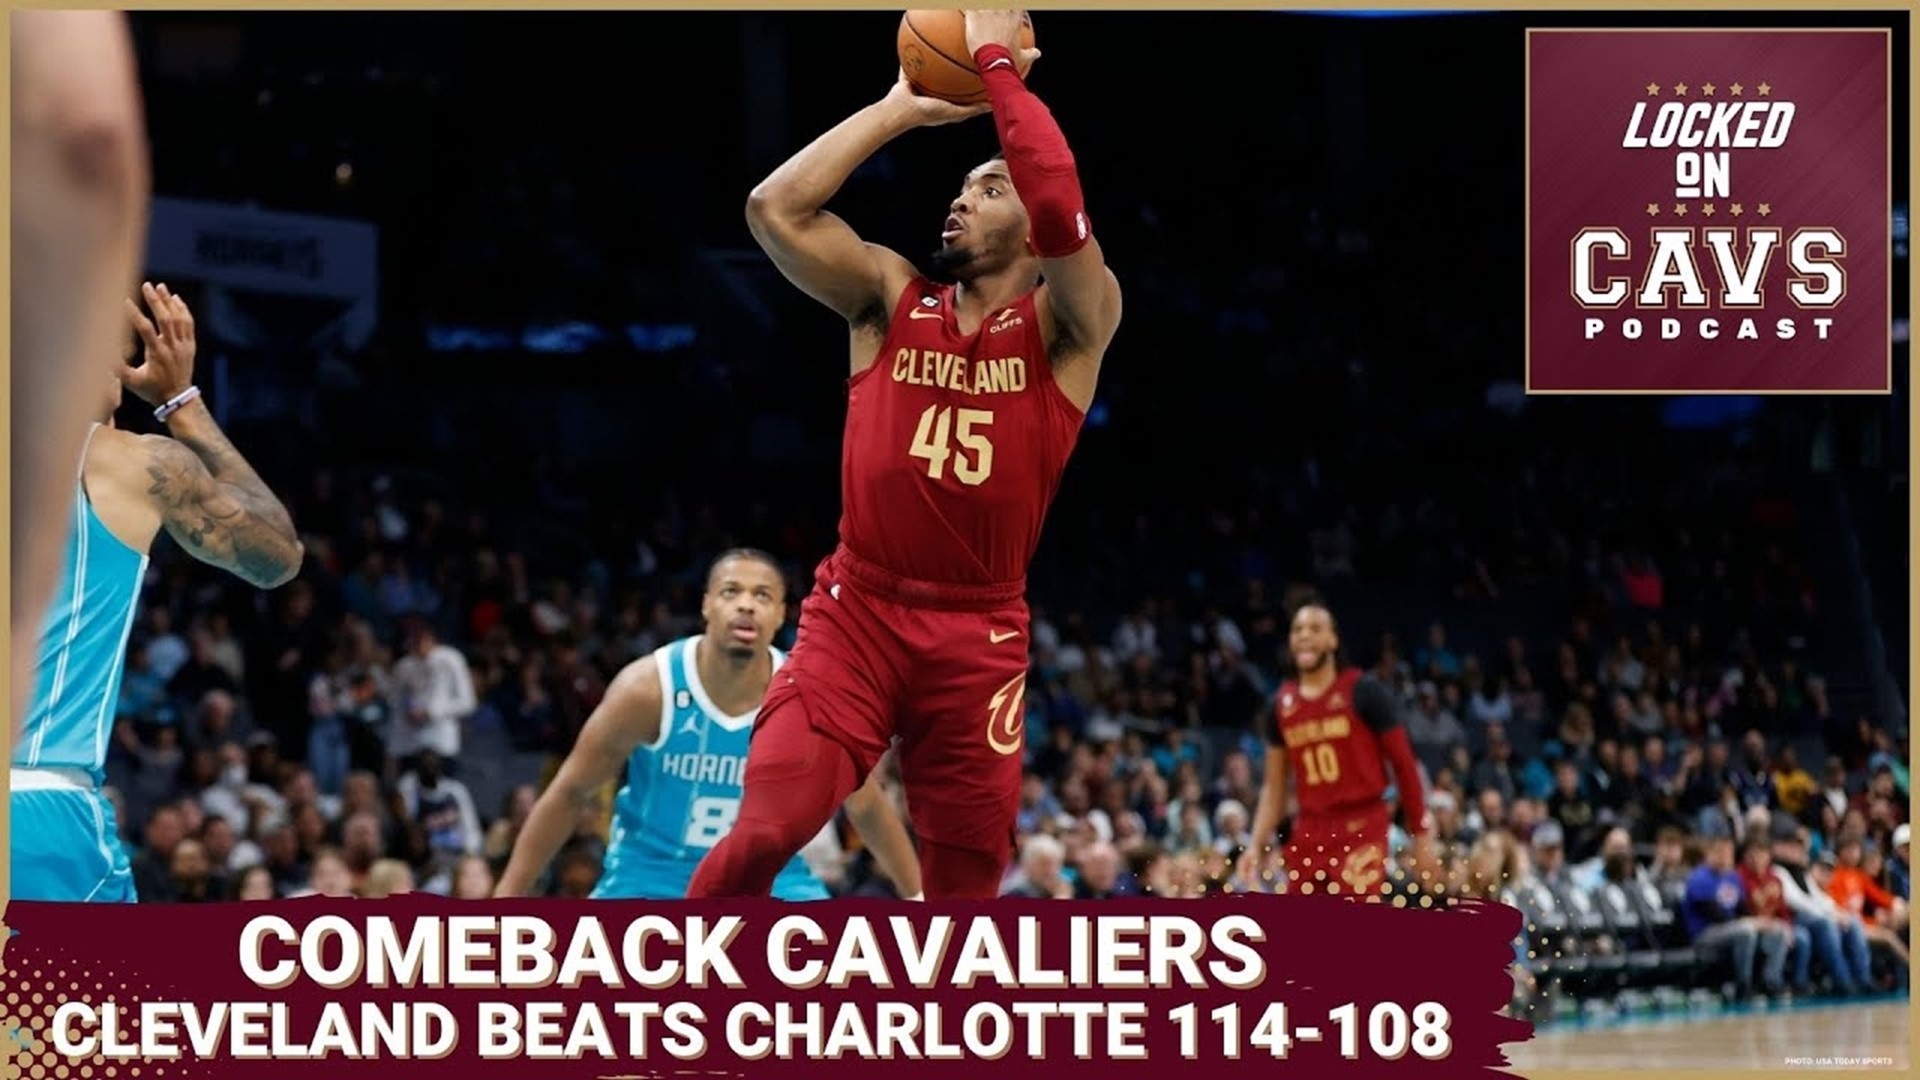 Host Chris Manning goes solo to talk about the Cavs’ comeback win over the Hornets.